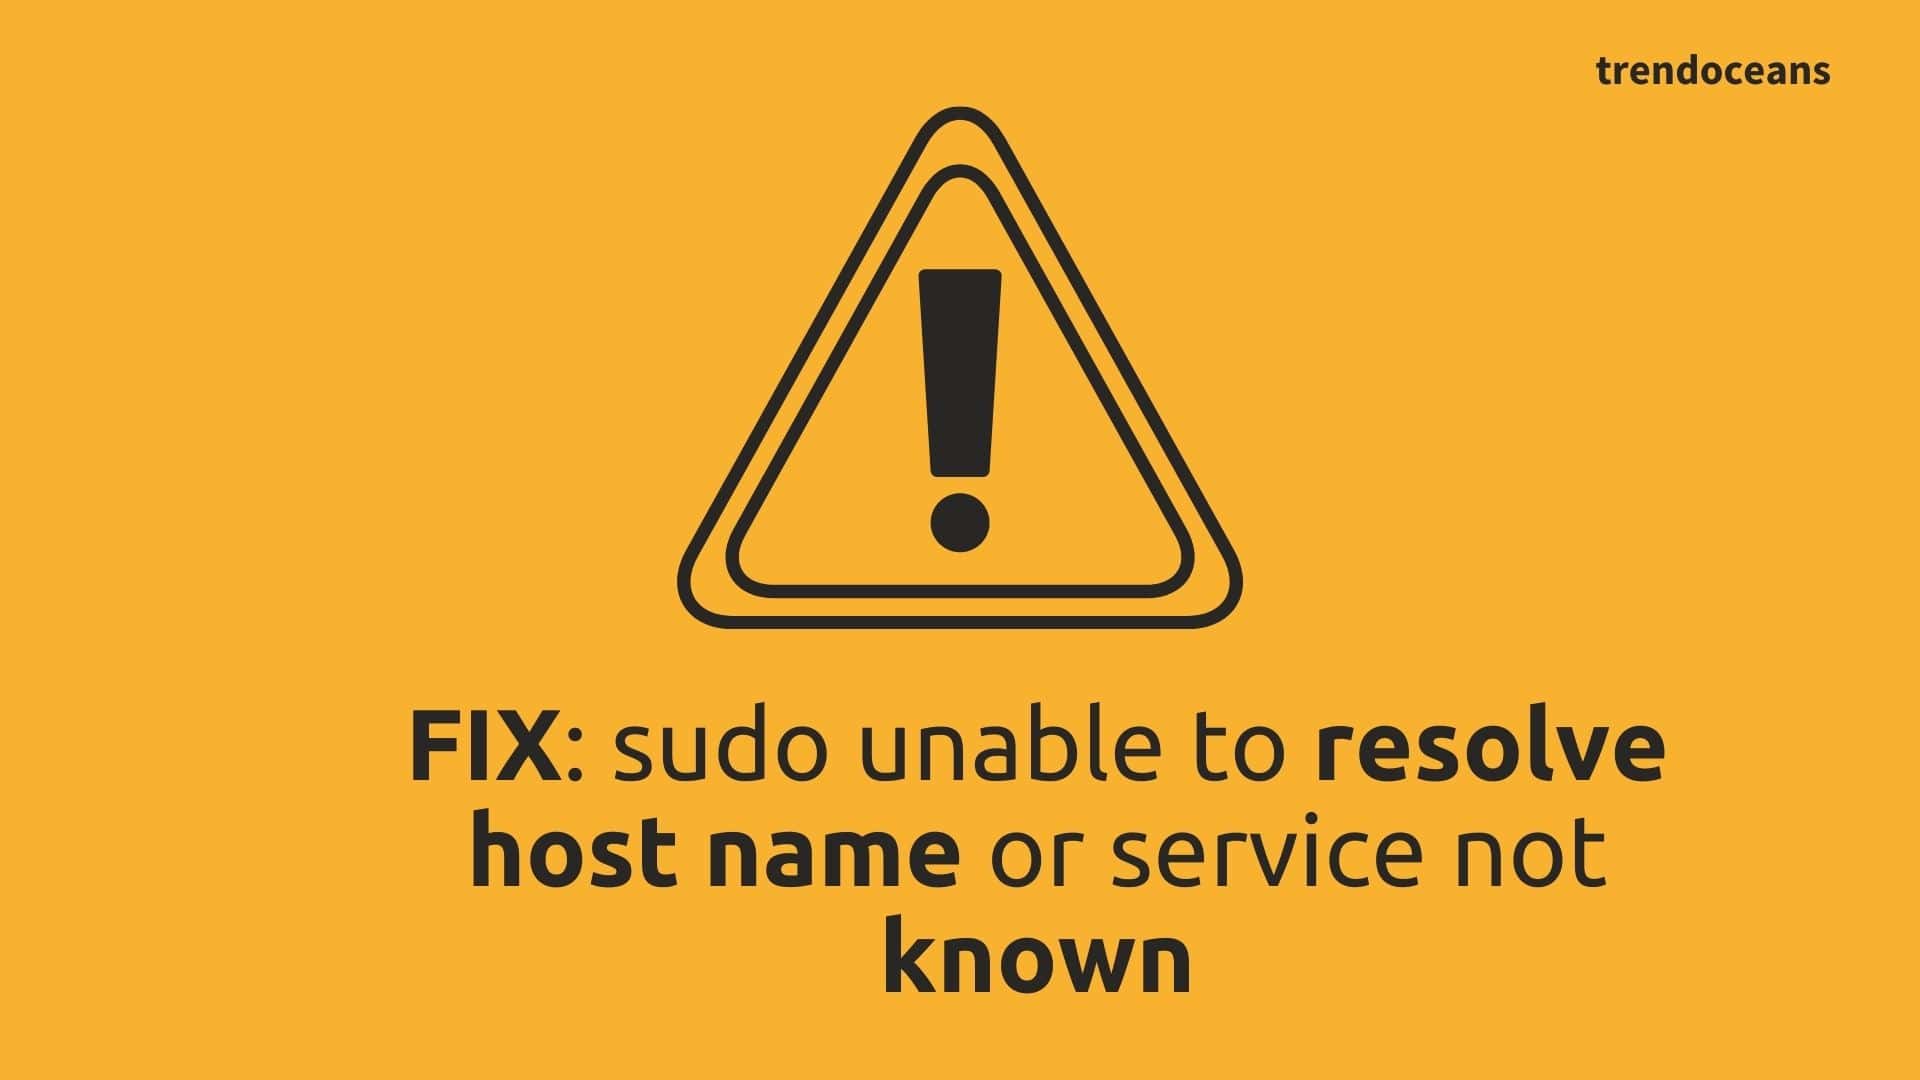 FIX: sudo unable to resolve host name or service not known